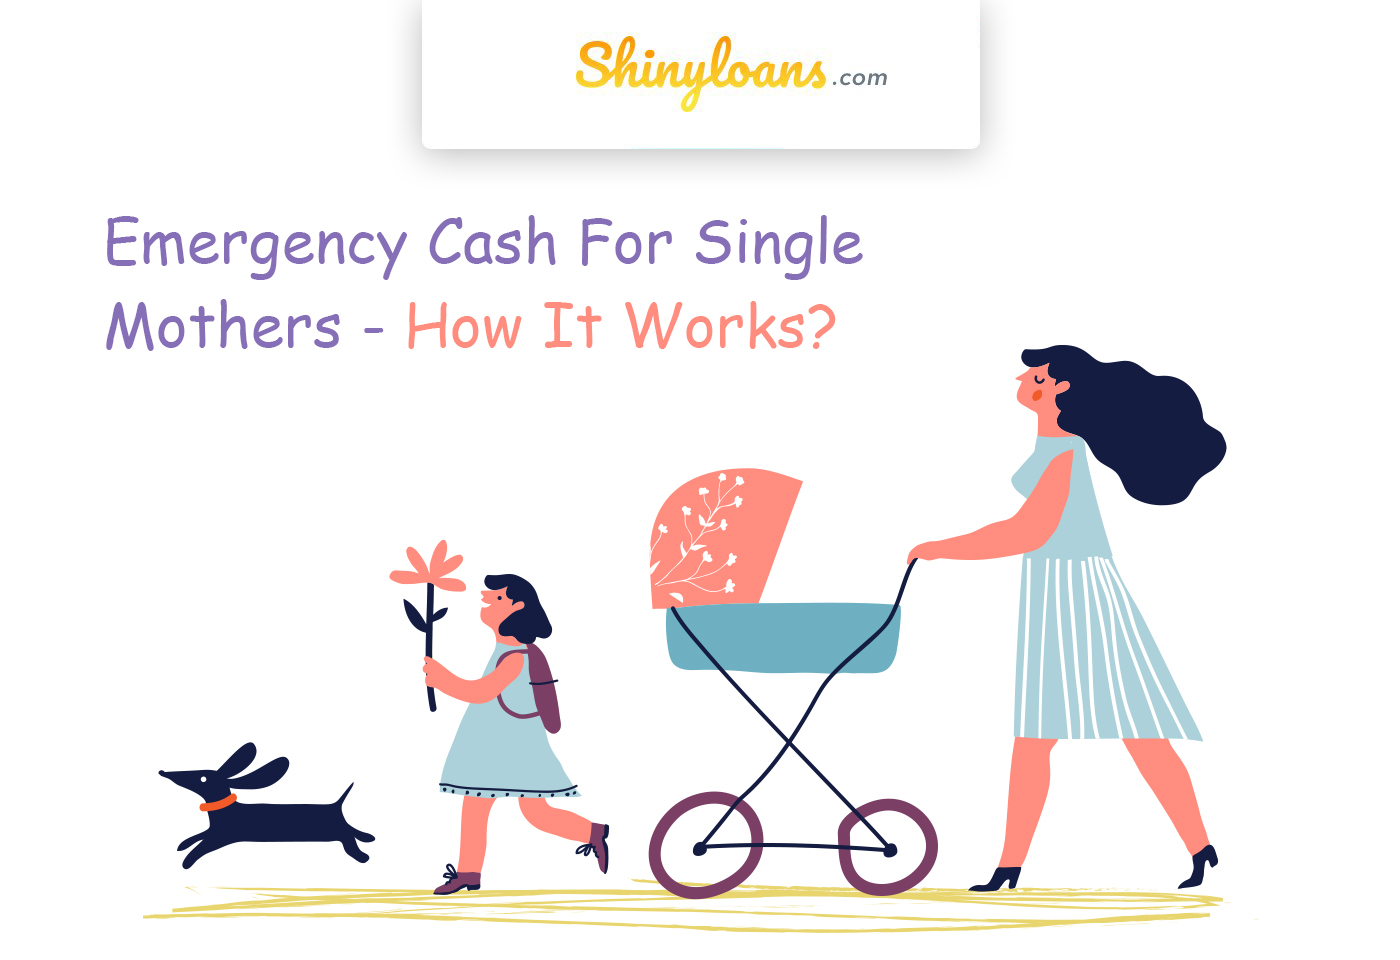 Quick Cash Loans for Single Mothers